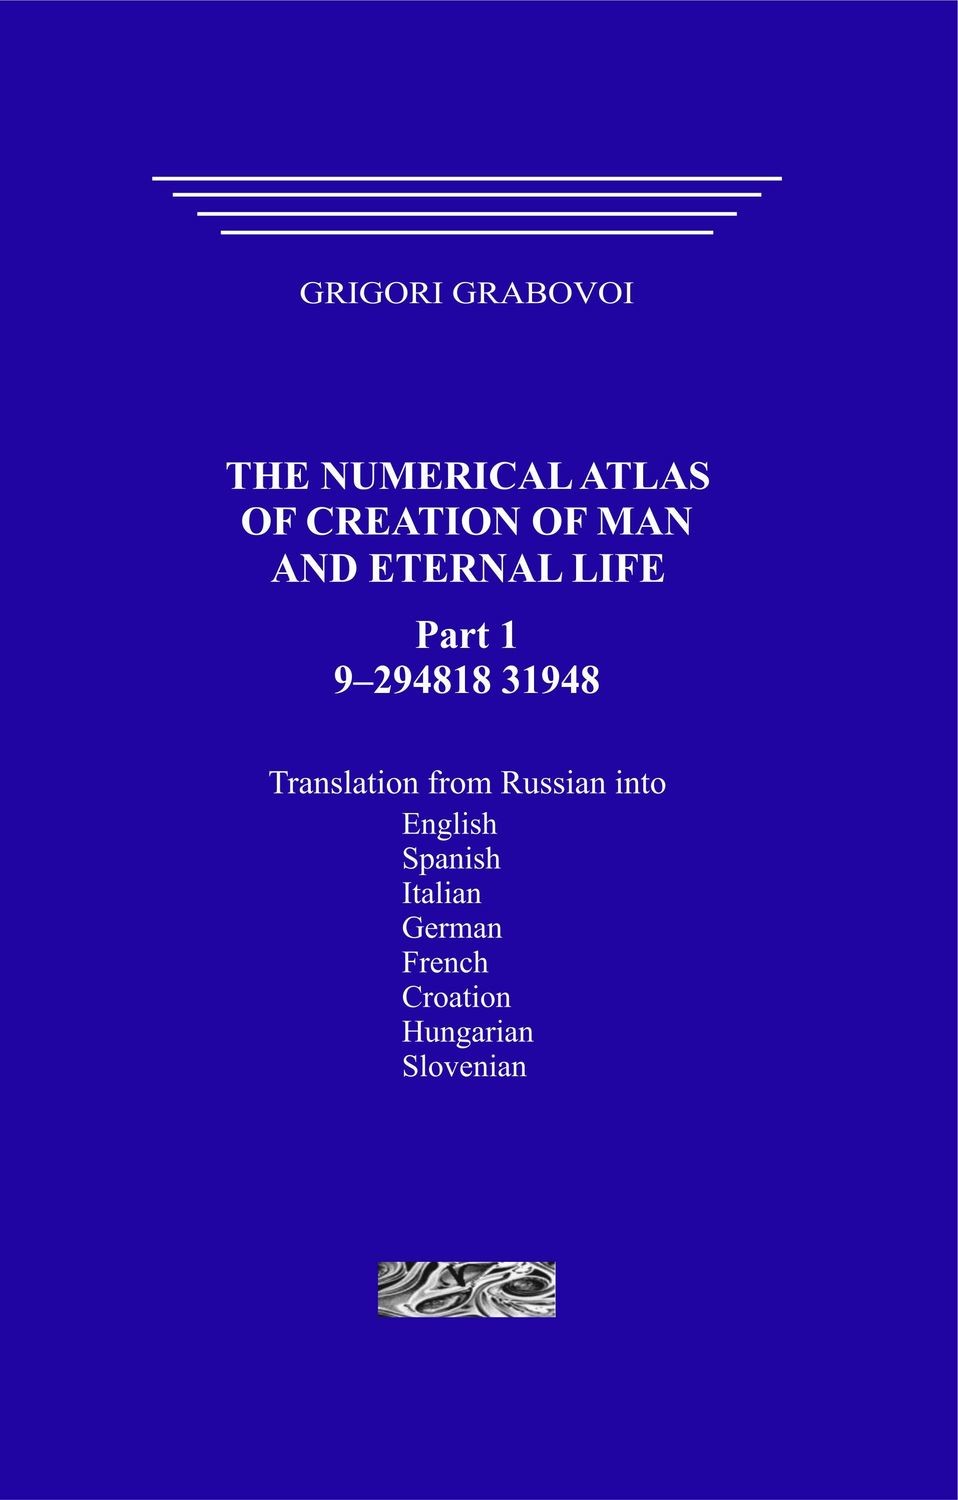 The Numerical Atlas of Creation of Man and Eternal Life, Part 1. (hardcover)